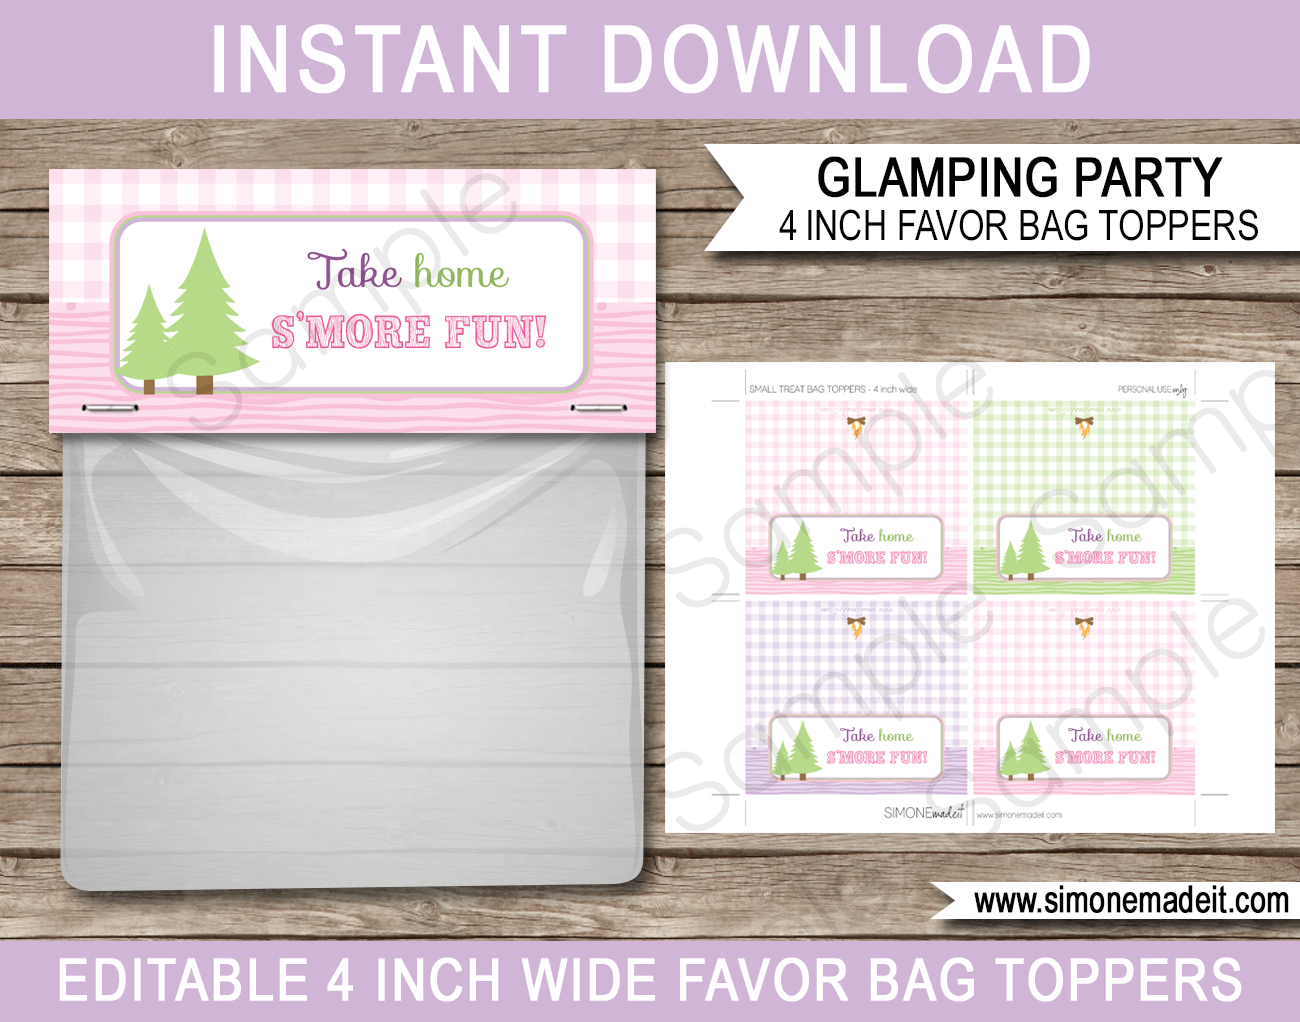 Glamping Party Favor Bag Toppers | Camping Birthday Party Favors | Editable DIY Template | $3.00 INSTANT DOWNLOAD via SIMONEmadeit.com